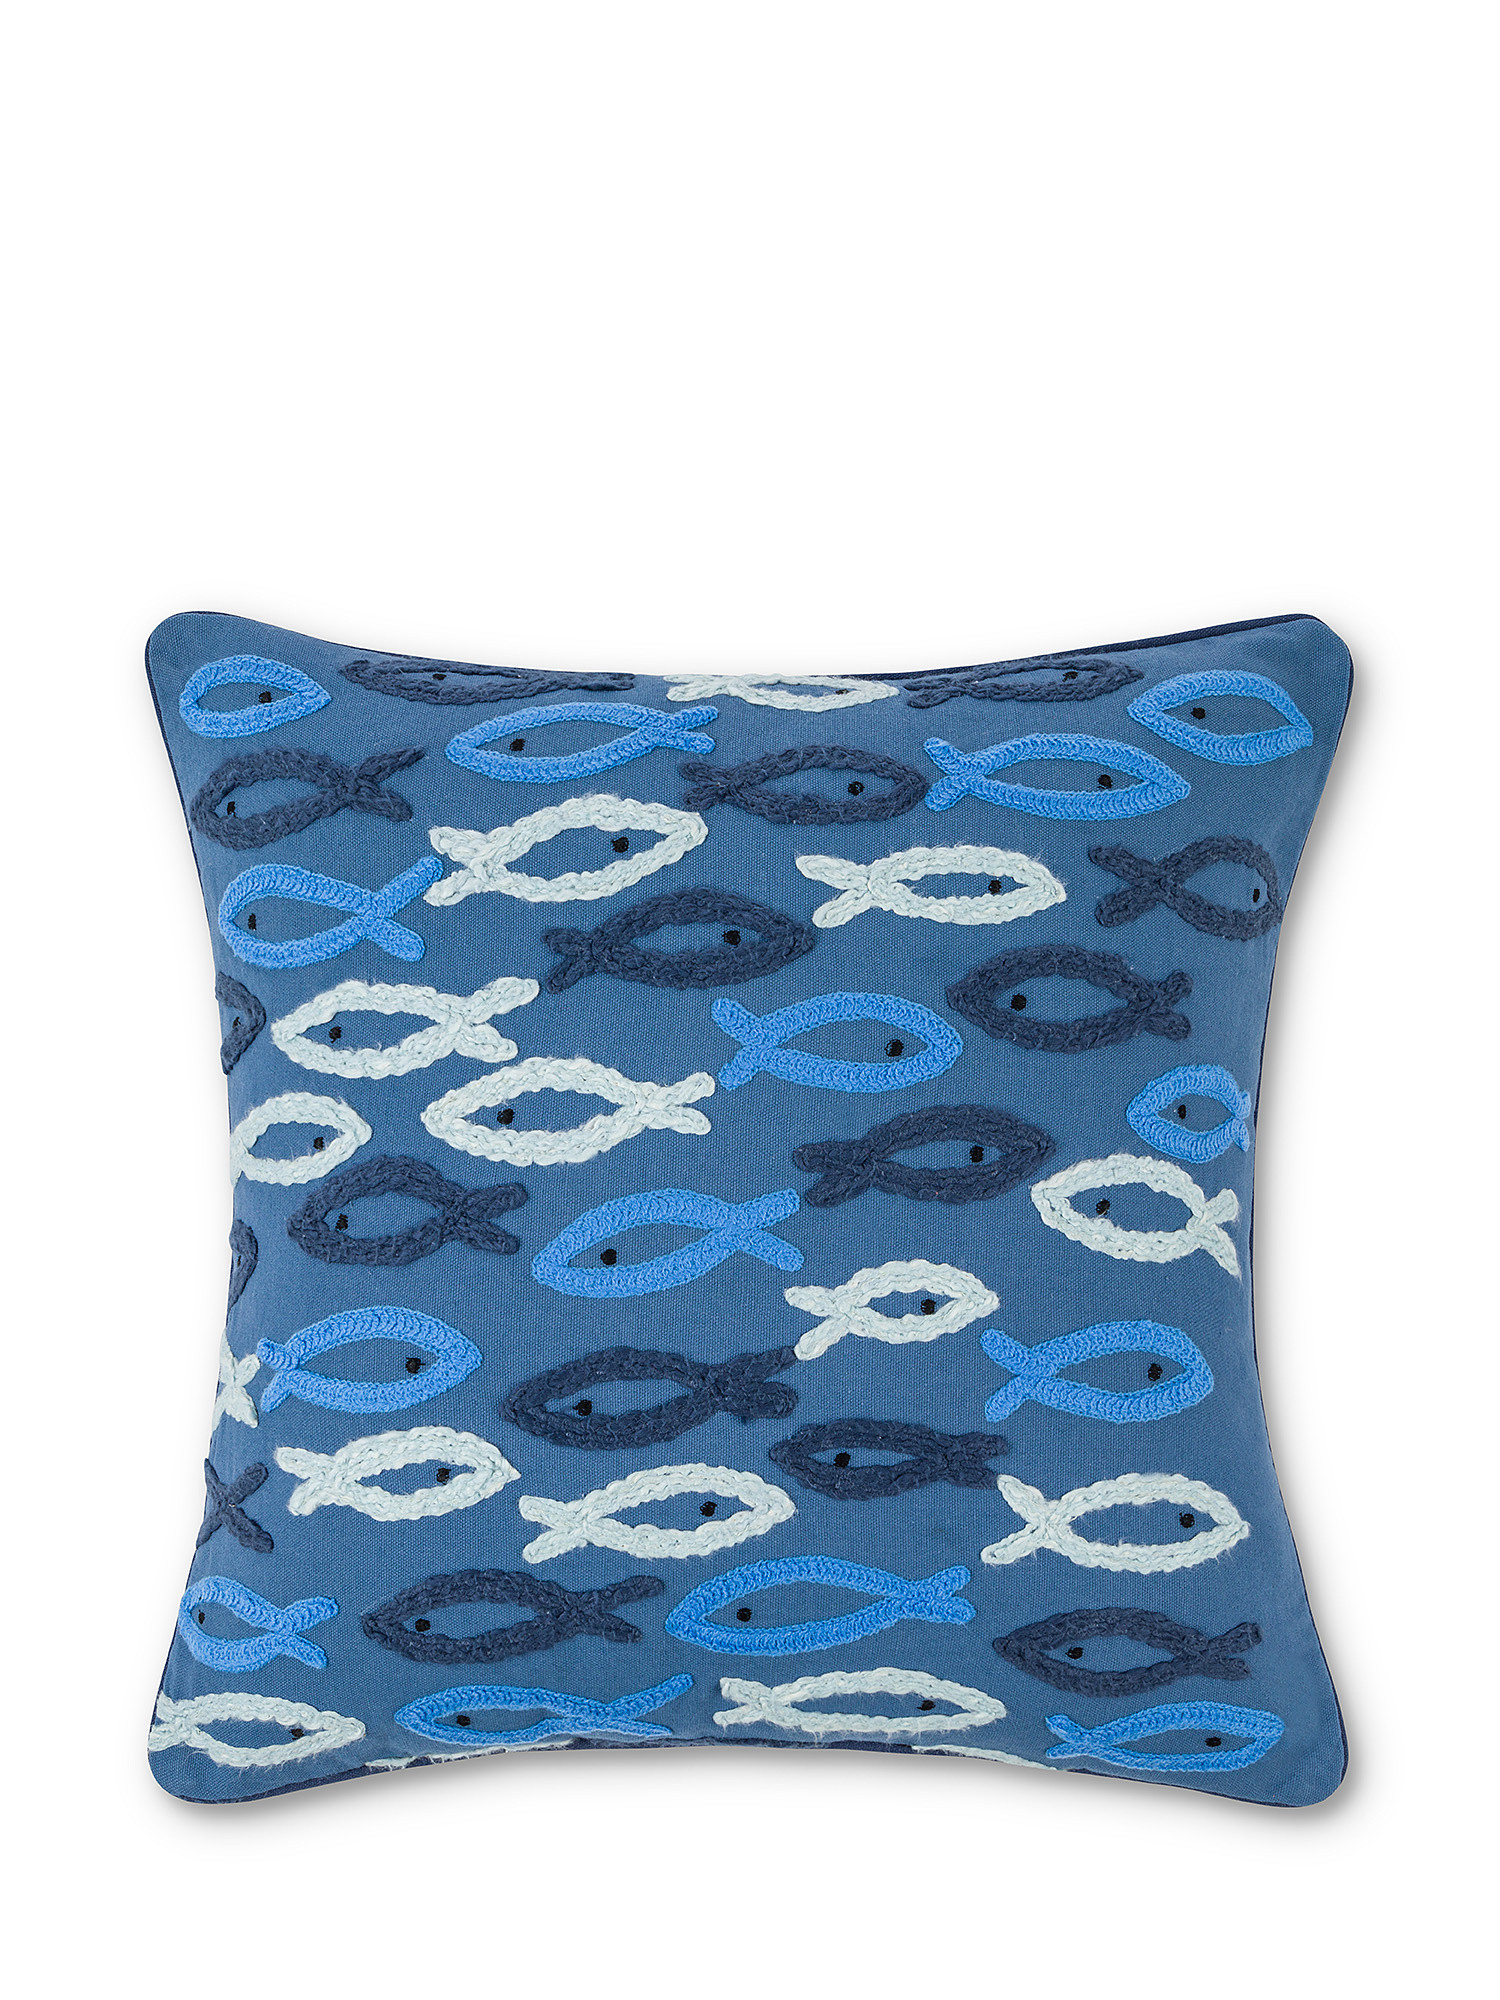 Cotton cushion with fish embroidery 45x45cm, Blue, large image number 0